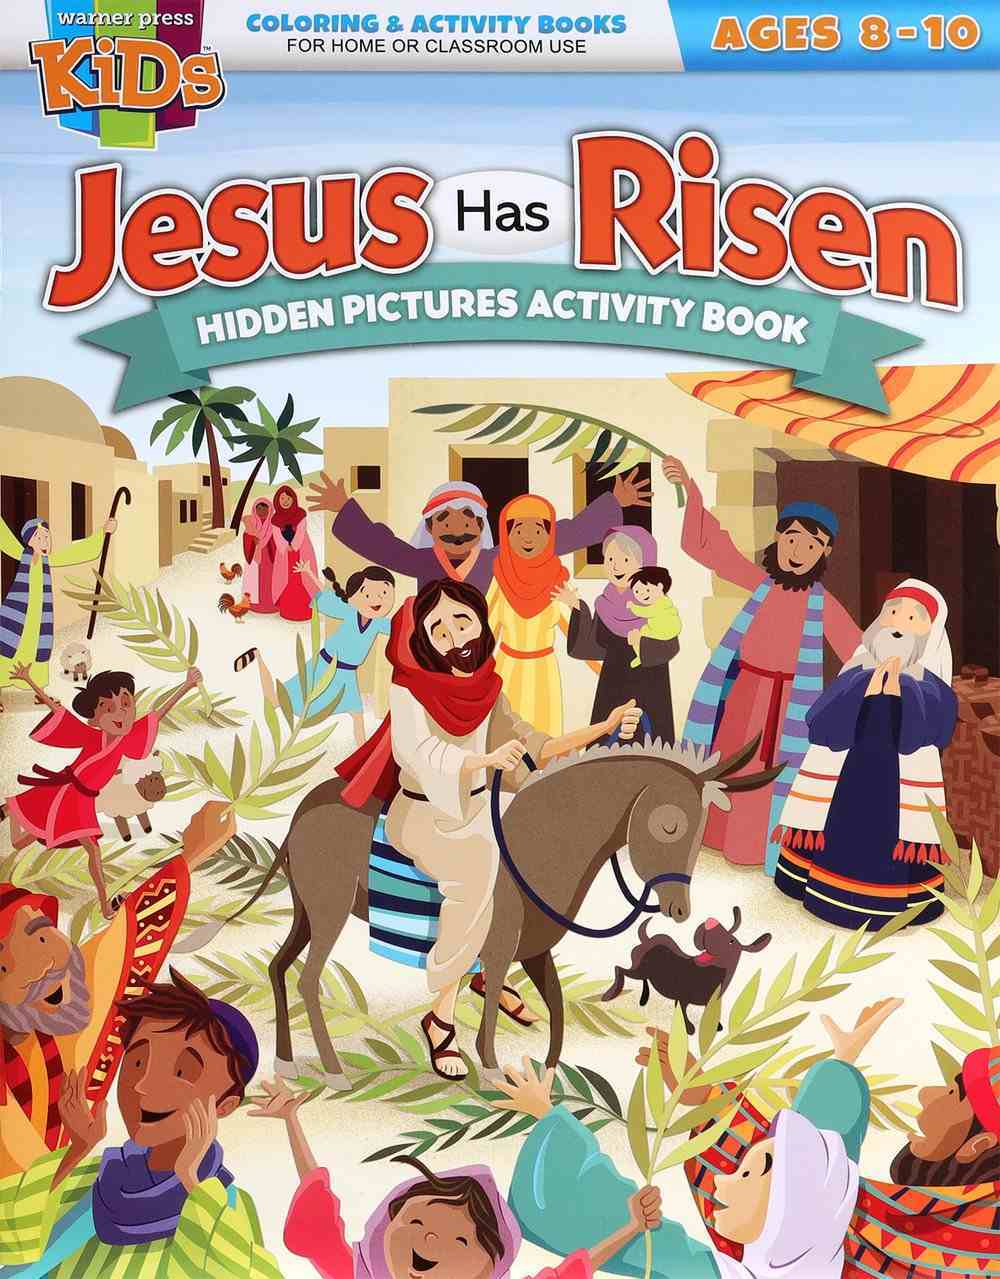 Jesus Has Risen: Hidden Pictures Activity Book (Ages 8-10, NIV) (Warner Press Colouring & Activity Books Series) Paperback